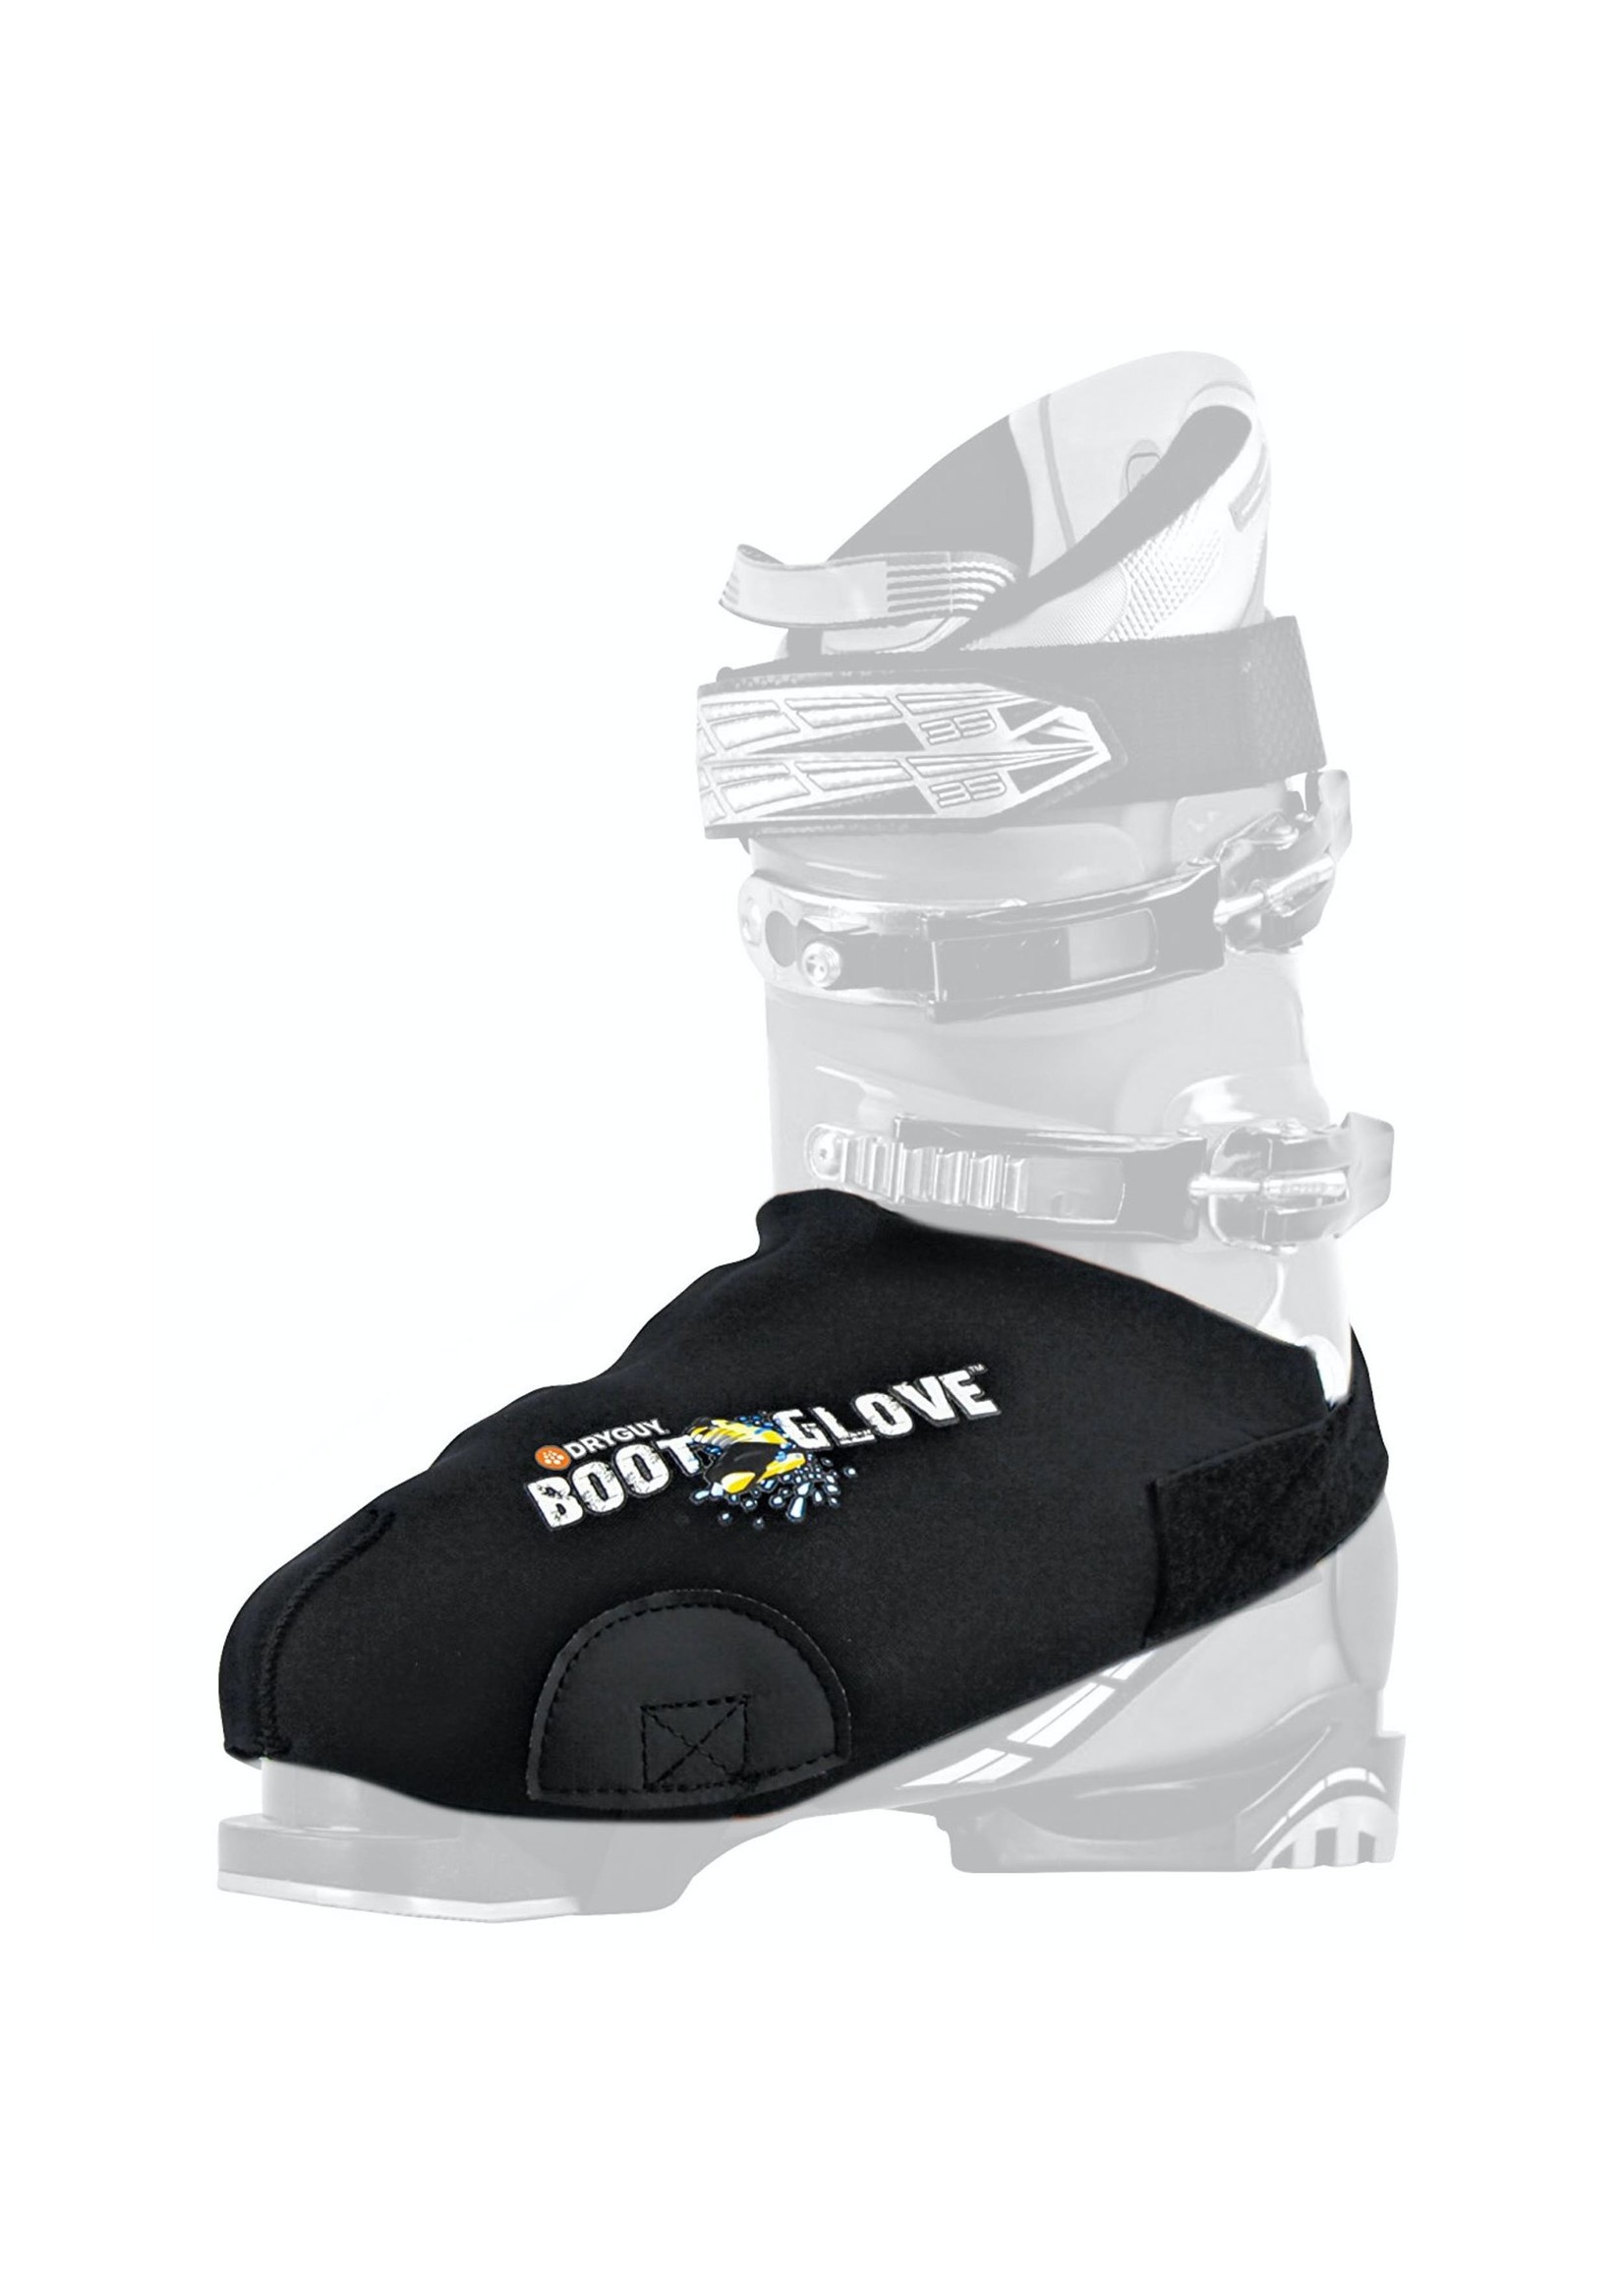 Couvre-bottes Dryguy BootGlove